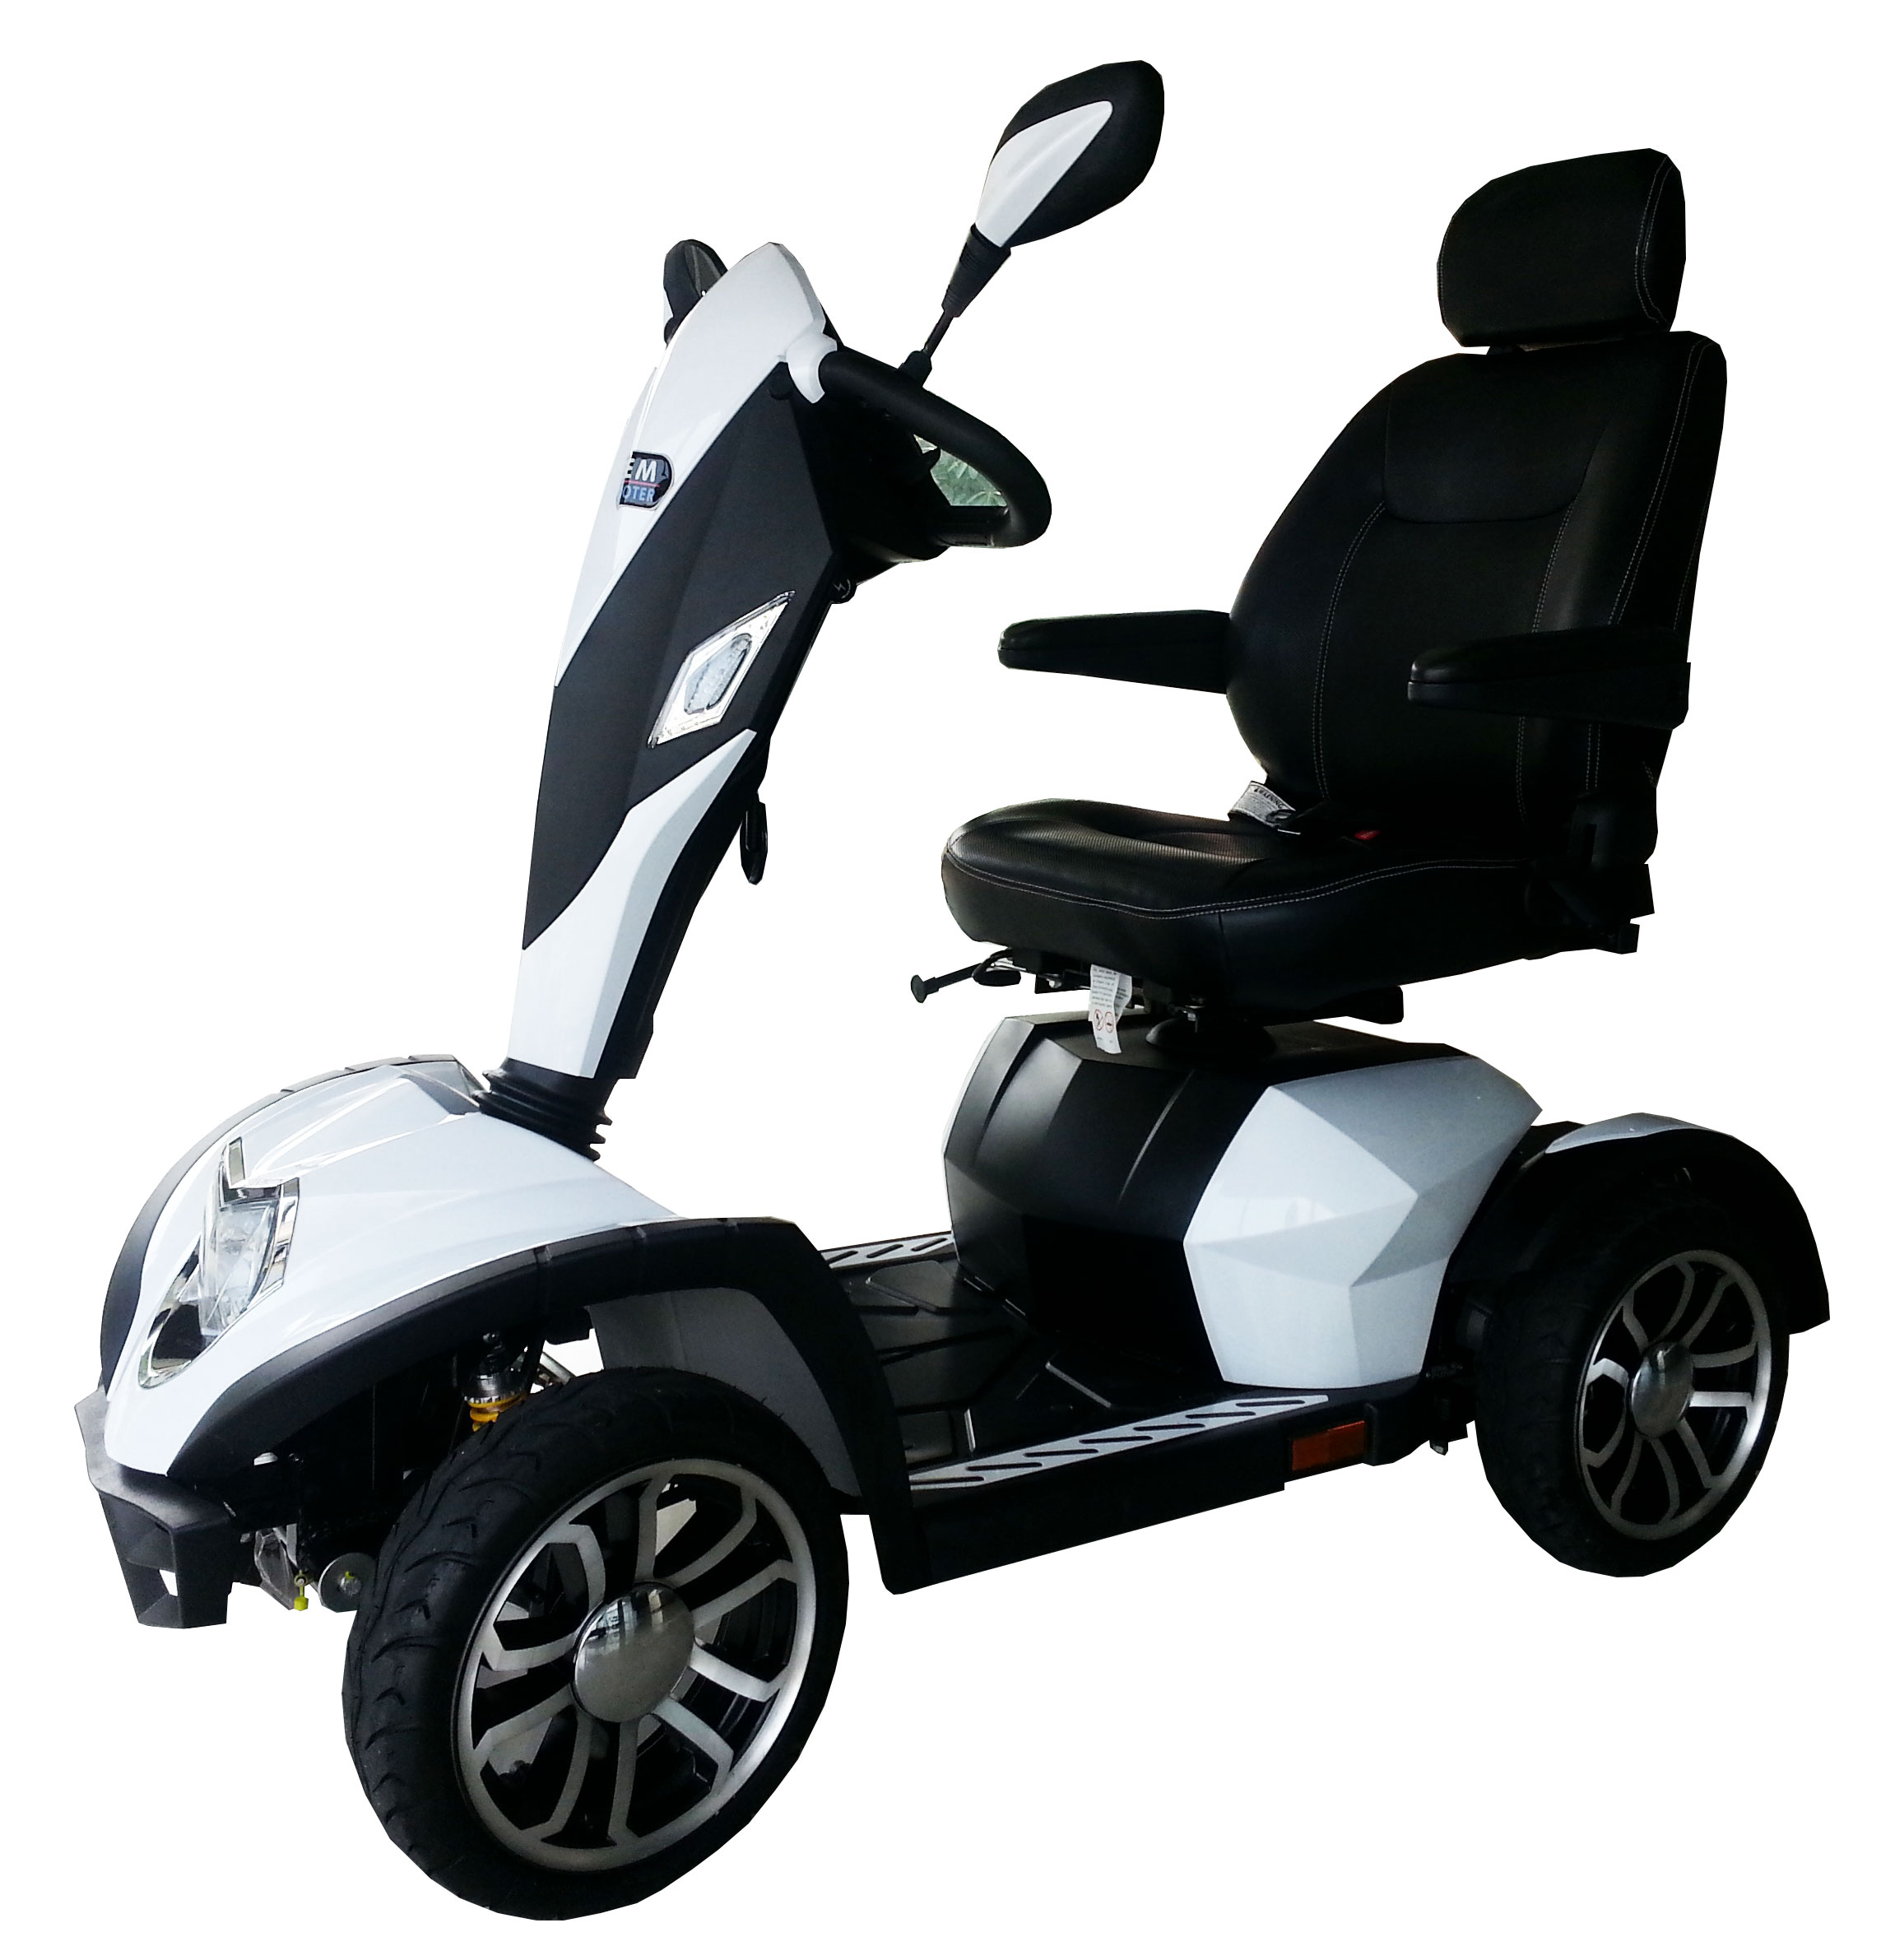 New Product - Large Jet Scooter